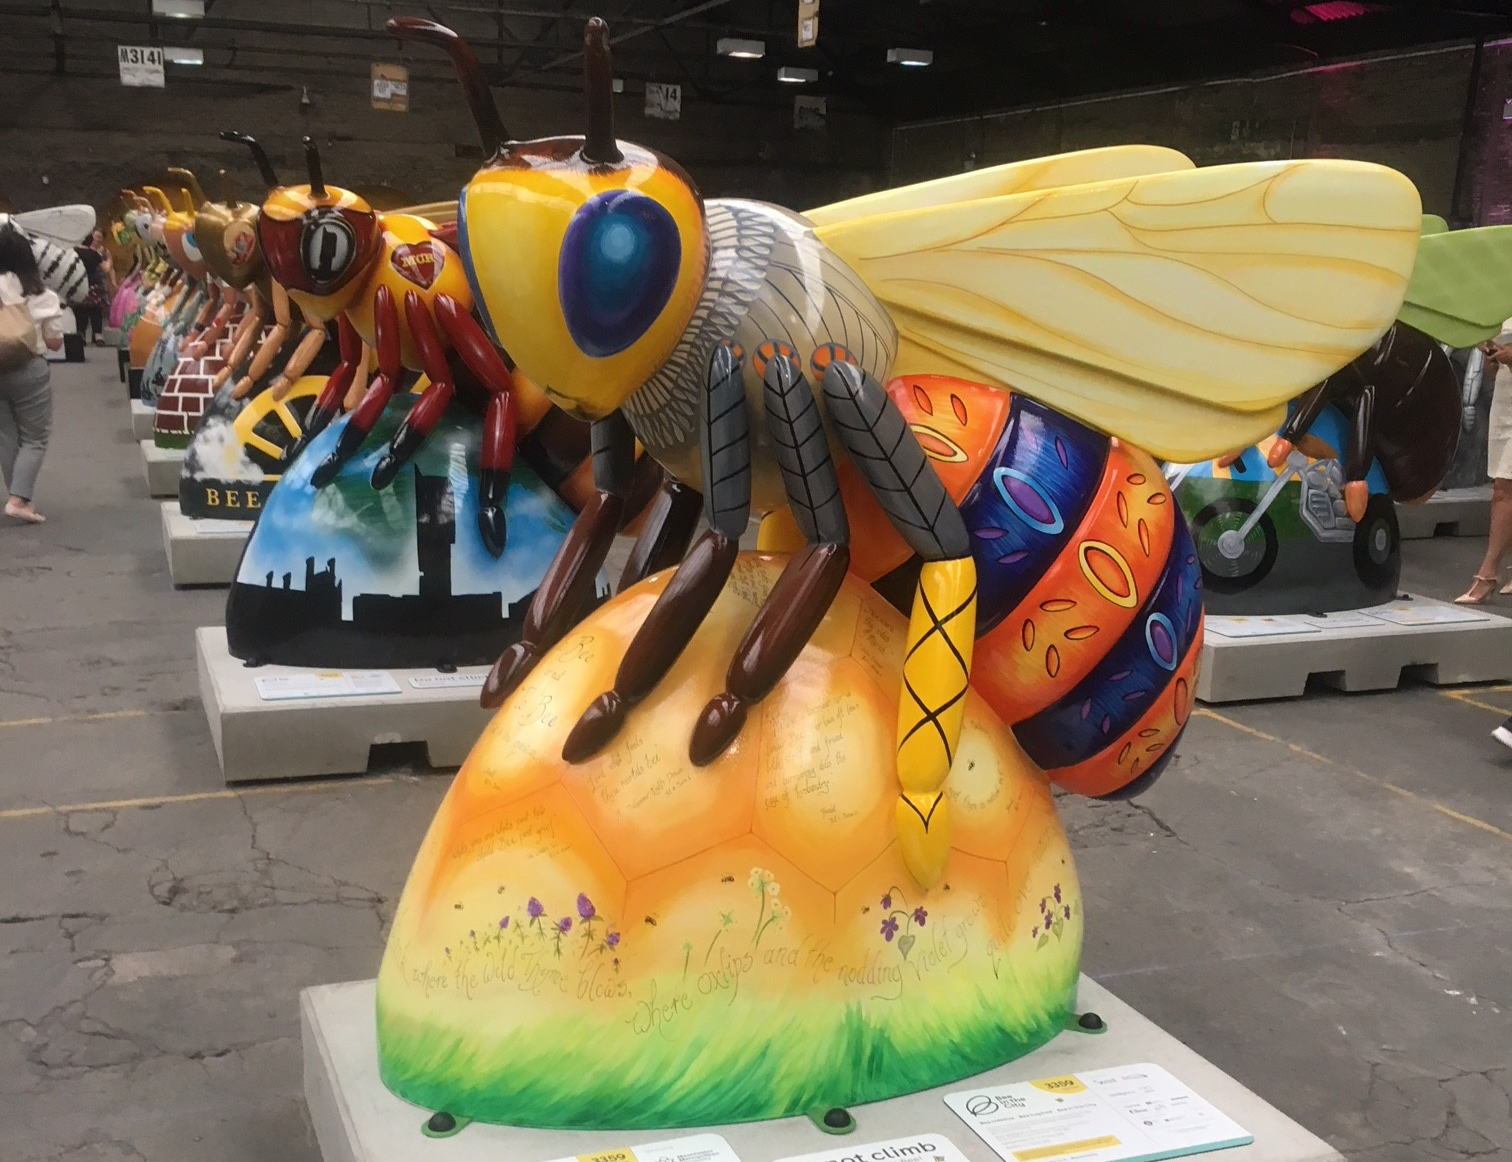 First glimpse of our Shakespeare bee!